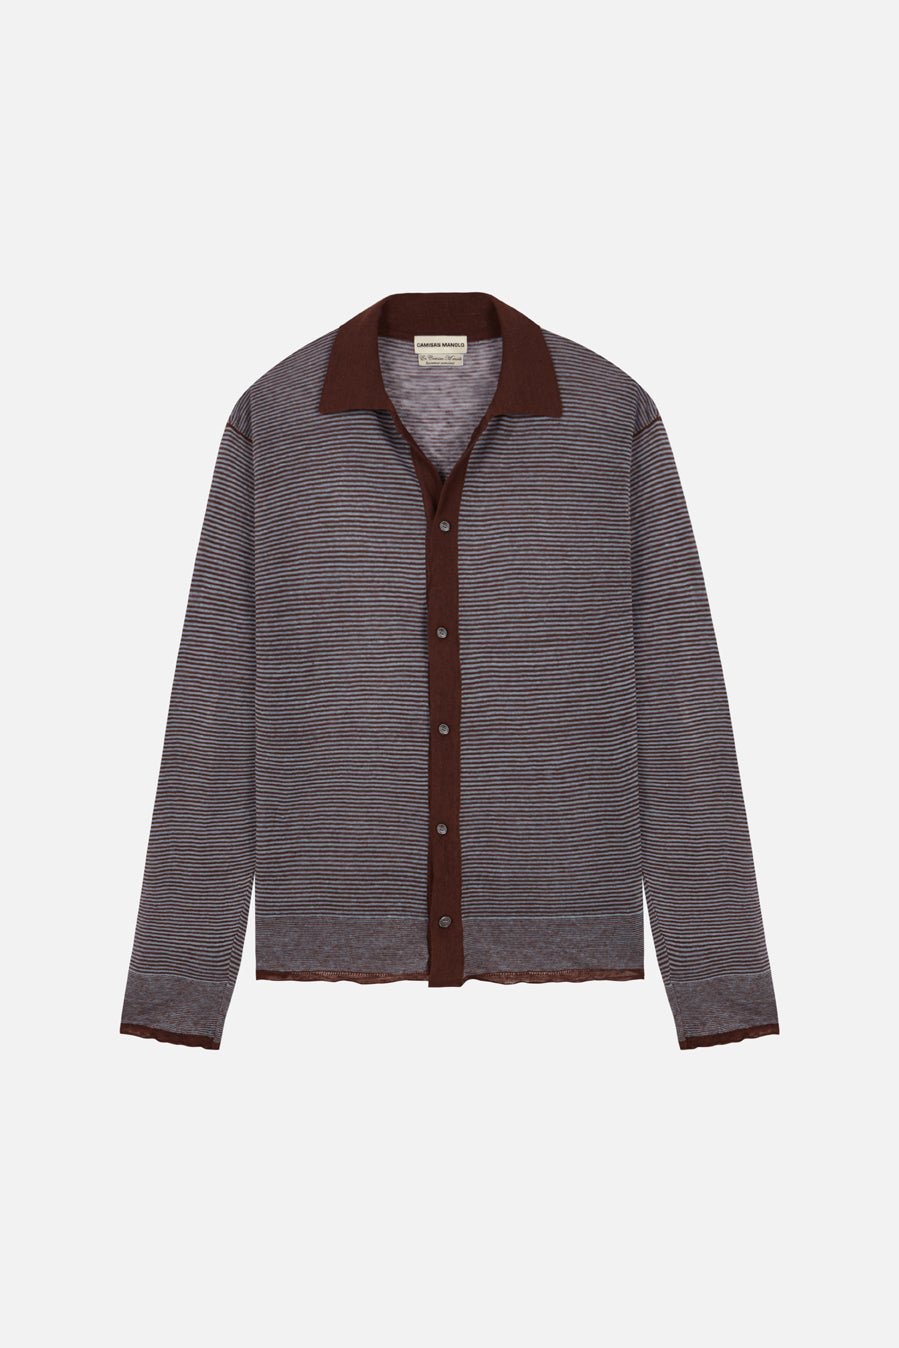 light blue/brown stripes knitted shirt - Camisas Manolo